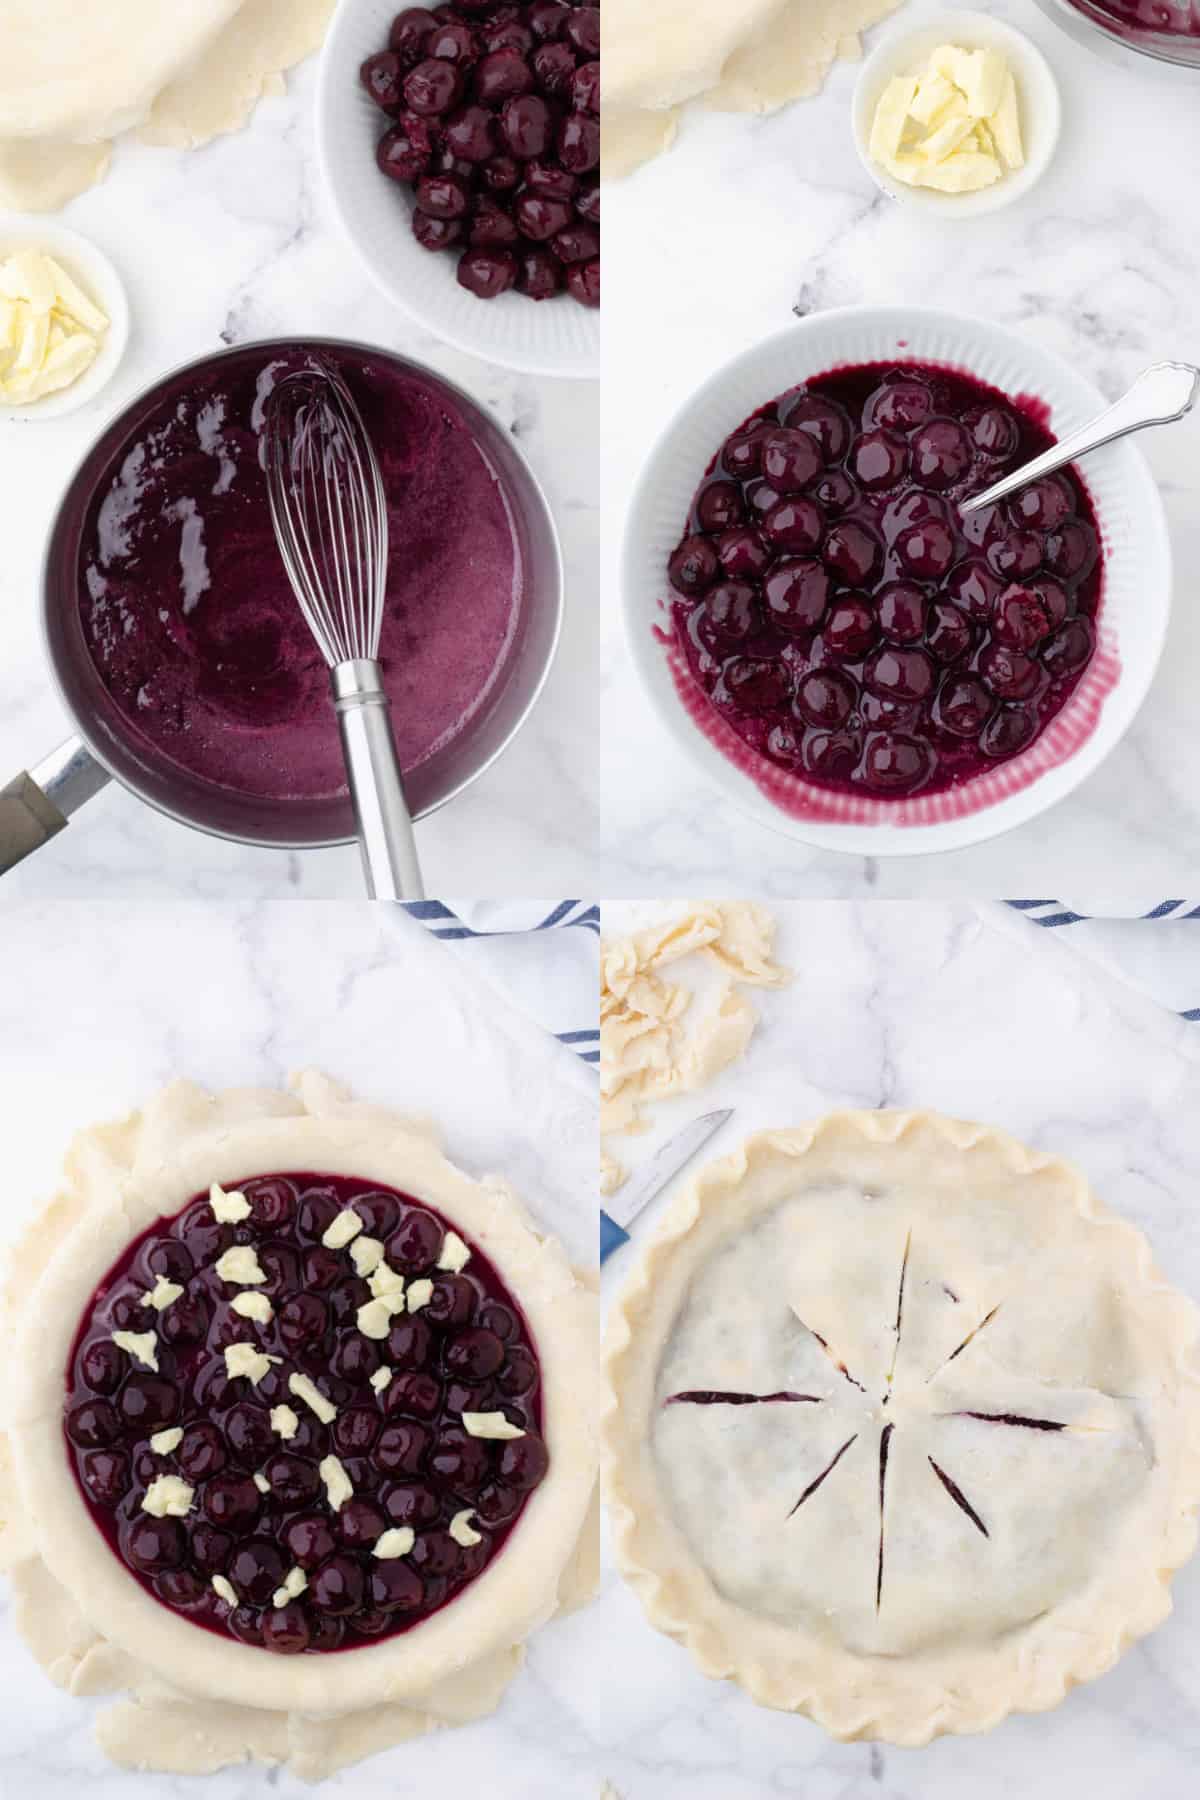 Four process photos. First one, cherry juice in a saucepan. Second one, cherries poured into the saucepan. Third one, thickened cherries on a homemade pie crust. Fourth one, top pie crust placed on top.